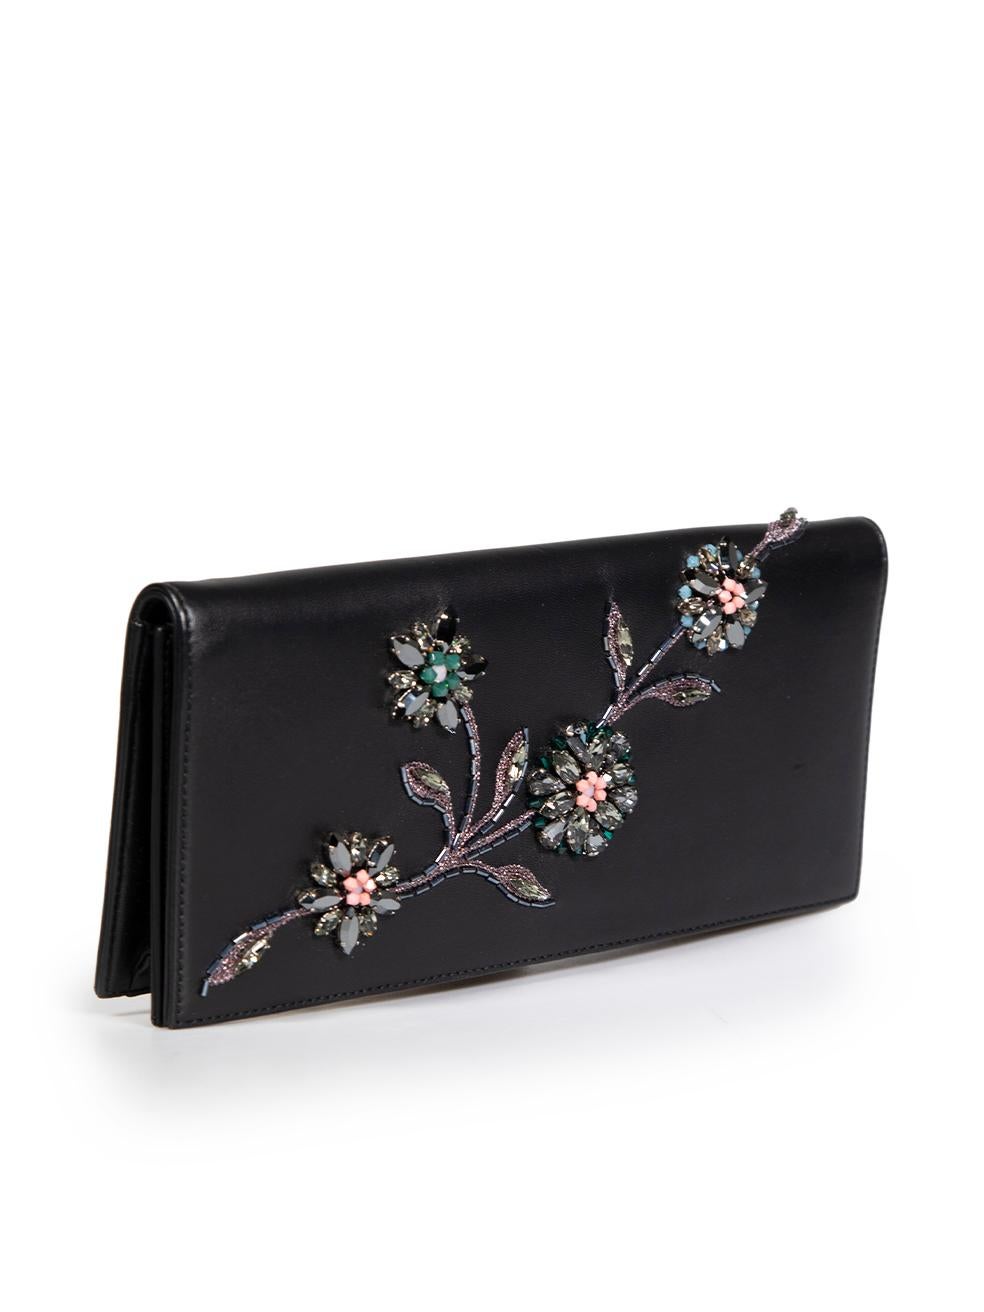 CONDITION is Very good. Minimal wear to clutch is evident. There are small scratches to the front, back and inside flap, and metal magnetic hardware on this used Dior designer resale item.
 
 
 
 Details
 
 
 Black
 
 Leather
 
 Medium clutch bag
 
